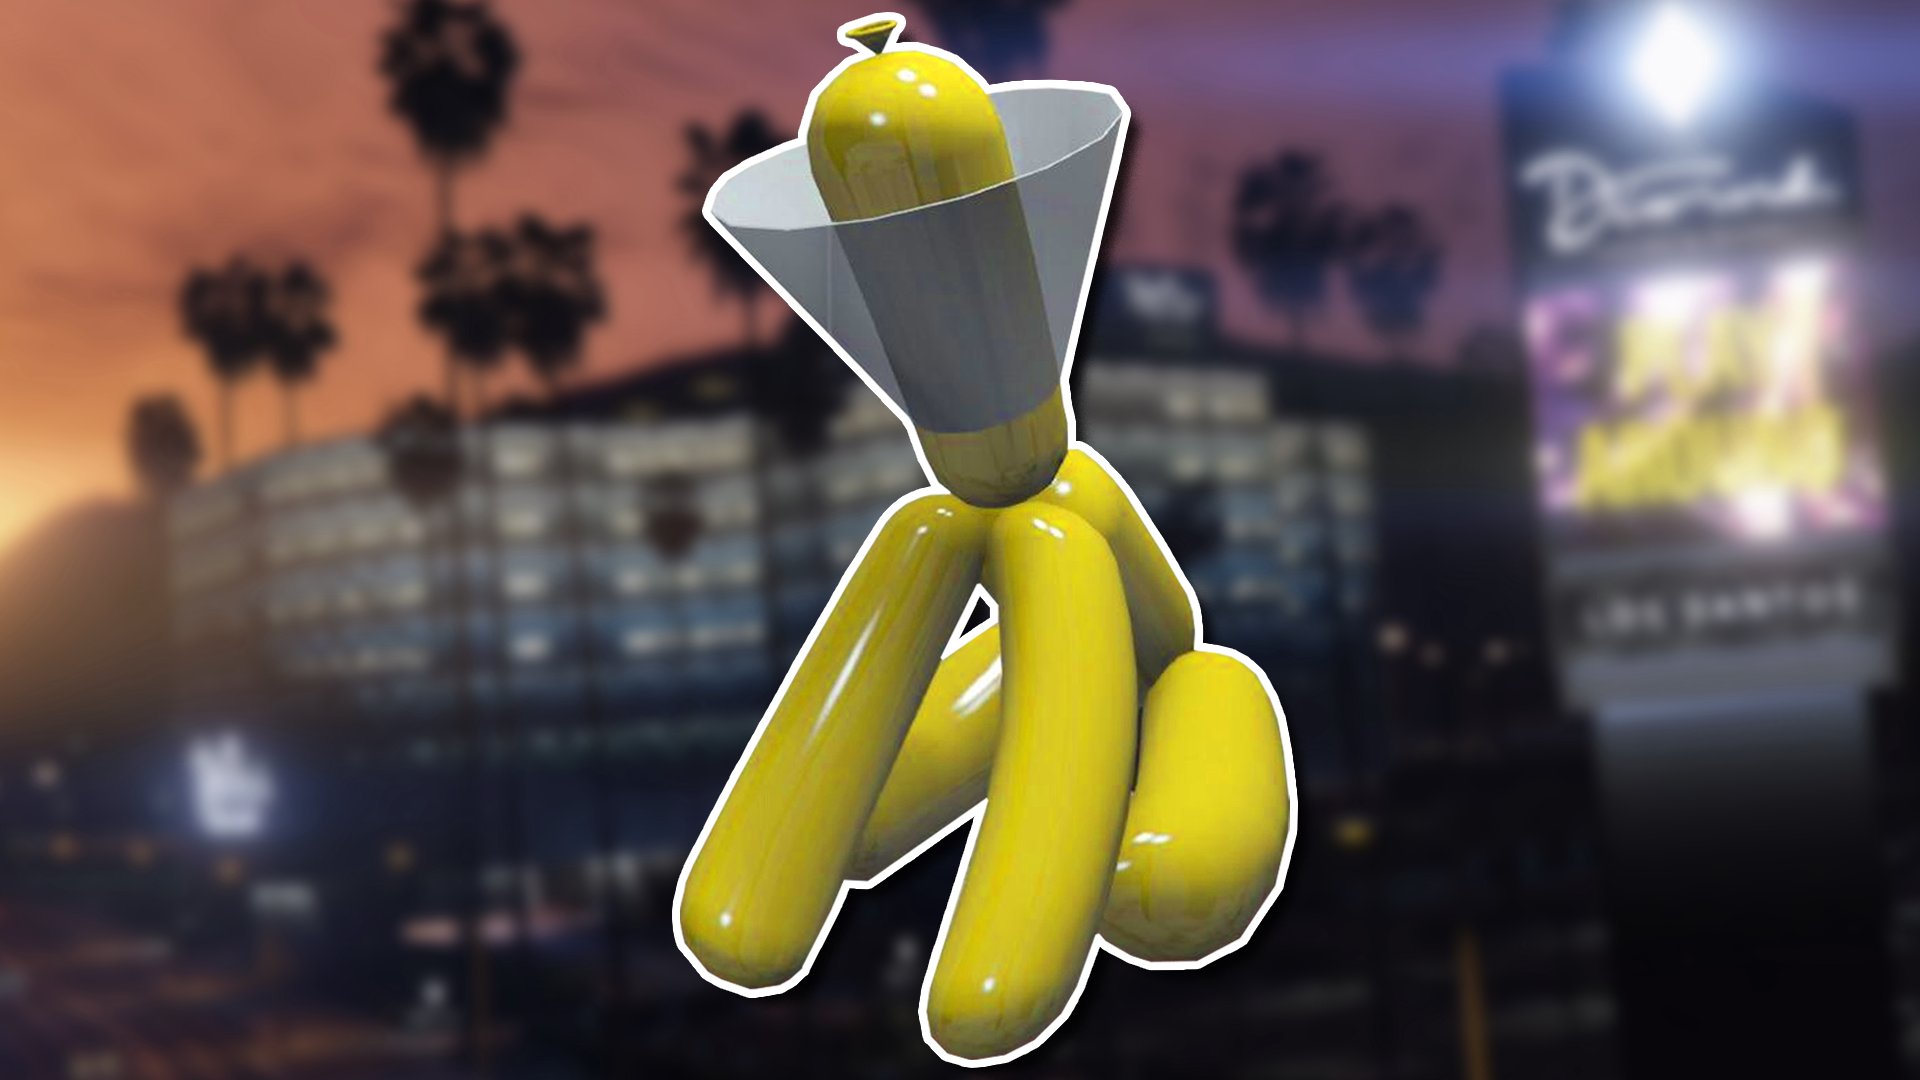 Finally, You Can Purchase The ‘Yellow Dog With Cone’ Statue In GTA Online